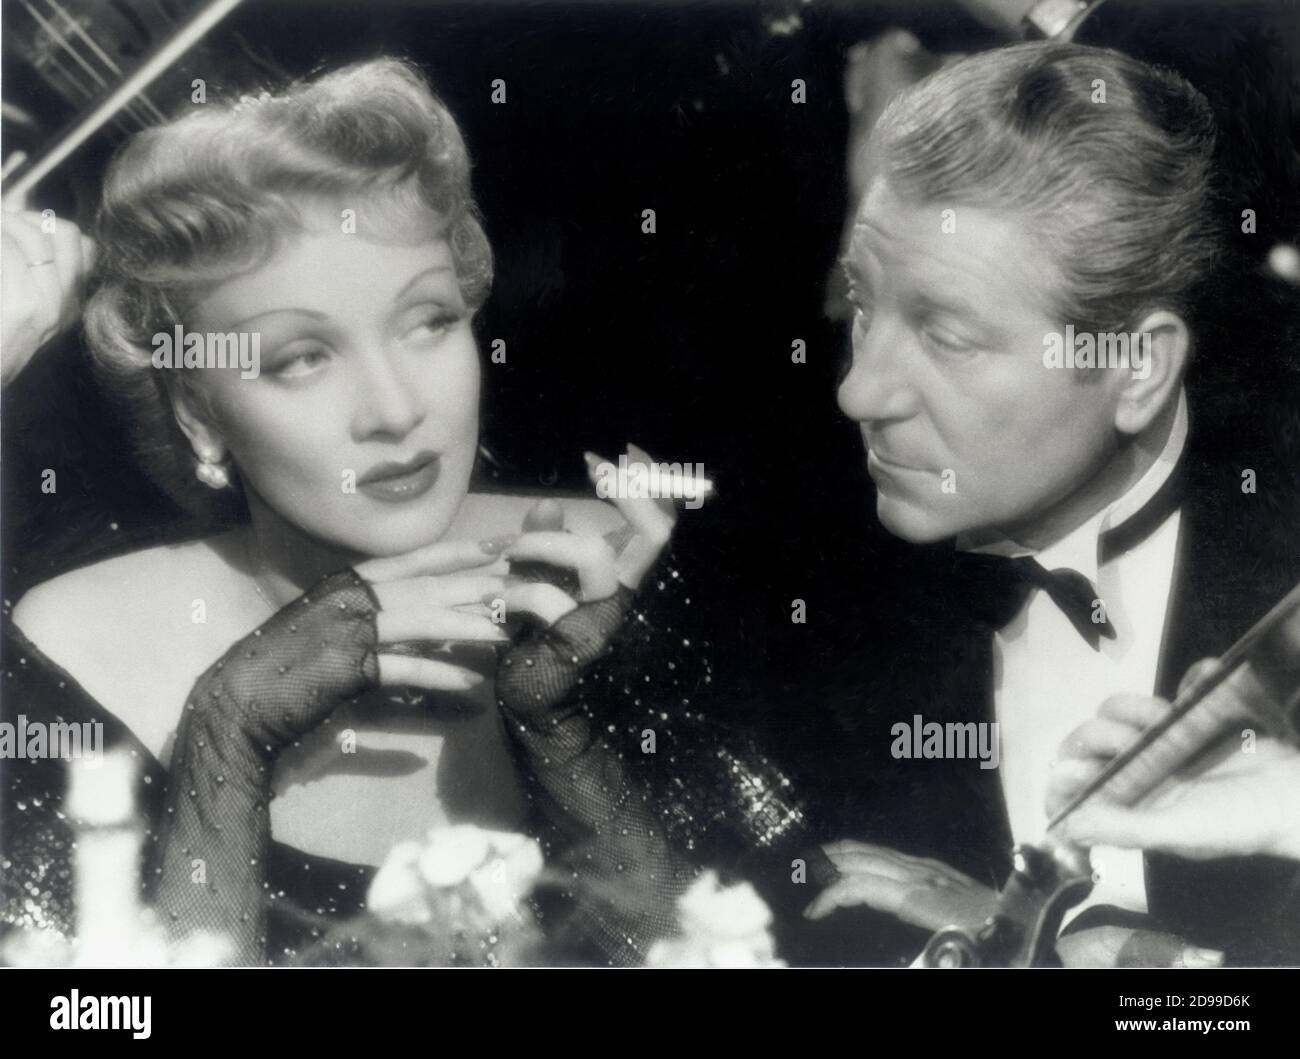 MARLENE  DIETRICH  and JEAN  GABIN  in  THE ROOM UPSTAIRS  ( 1946 - MARTIN ROUMAGNAC ) by Georges Lacambe   ----   ARCHIVIO  GBB Stock Photo